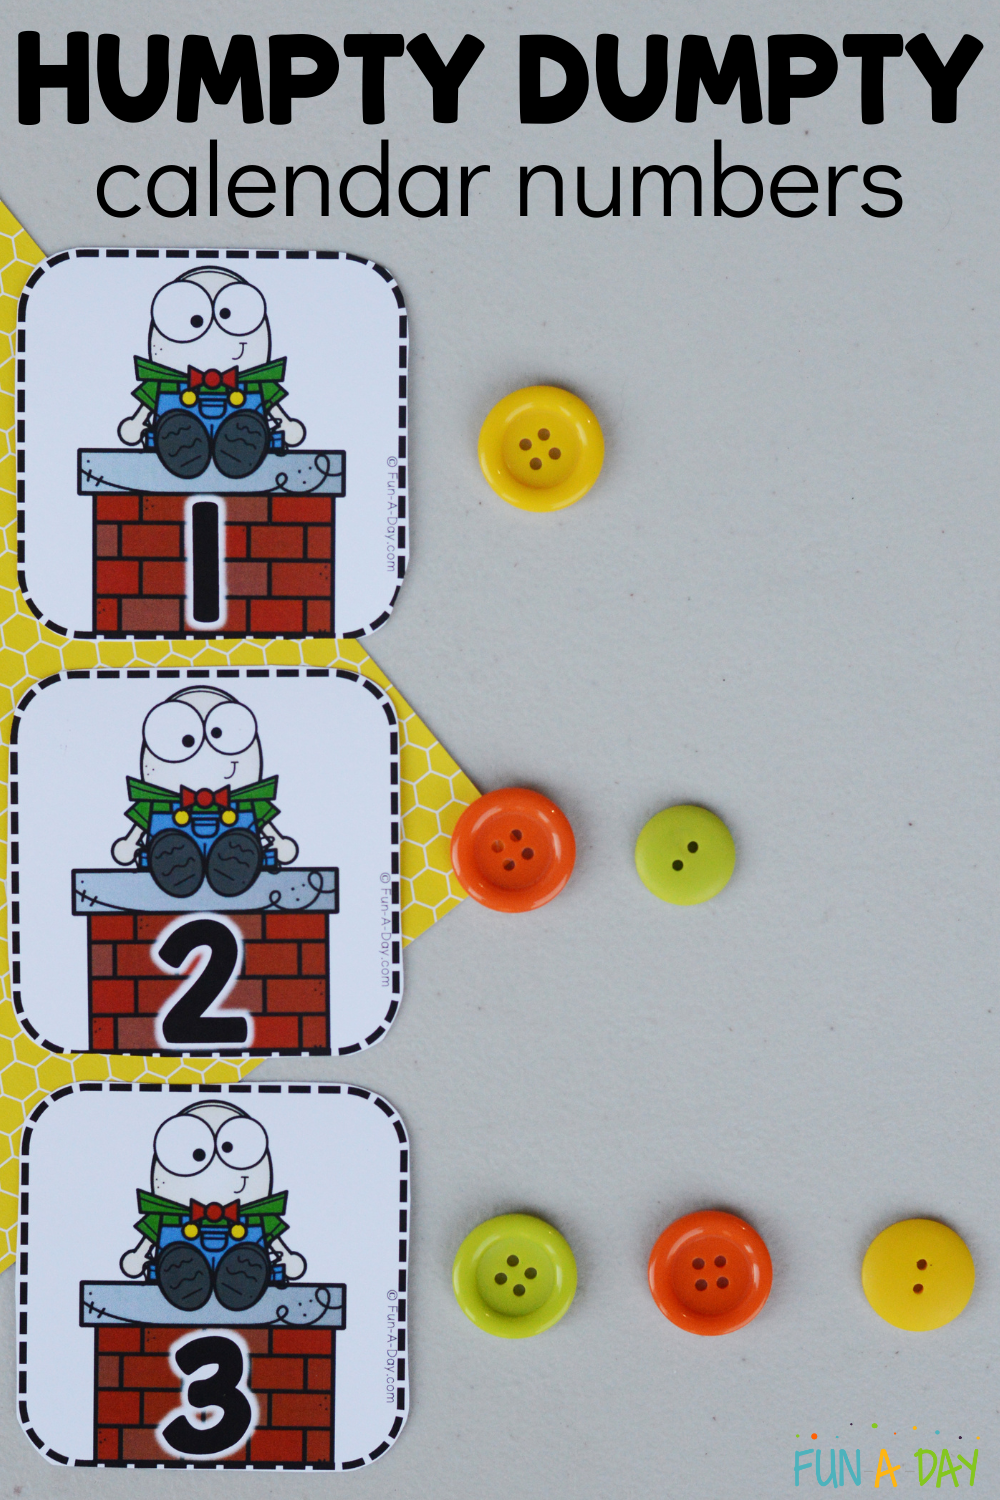 number cards in order 1, 2, 3 with buttons next to them and text that reads humpty dumpty calendar numbers